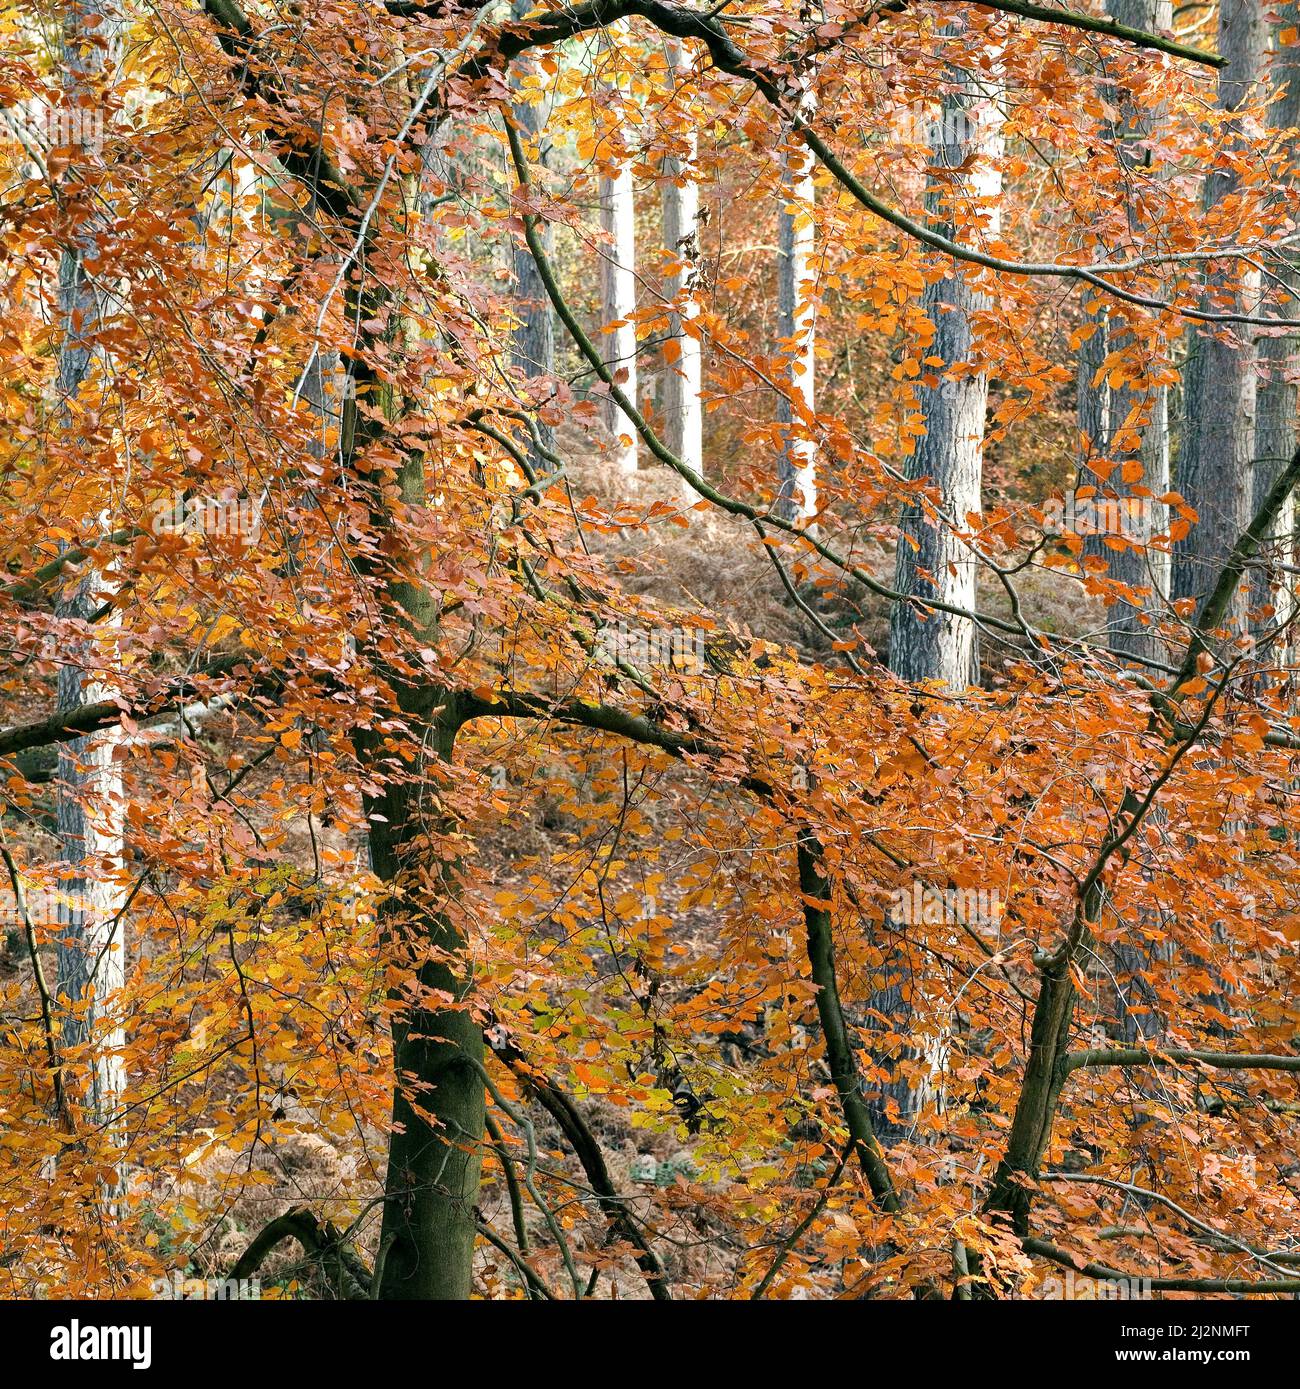 Autumn deciduous woodland containing many spectacular Beech trees in the beautiful forests and woodlands of Cannock Chase an Area of Outstanding Natur Stock Photo